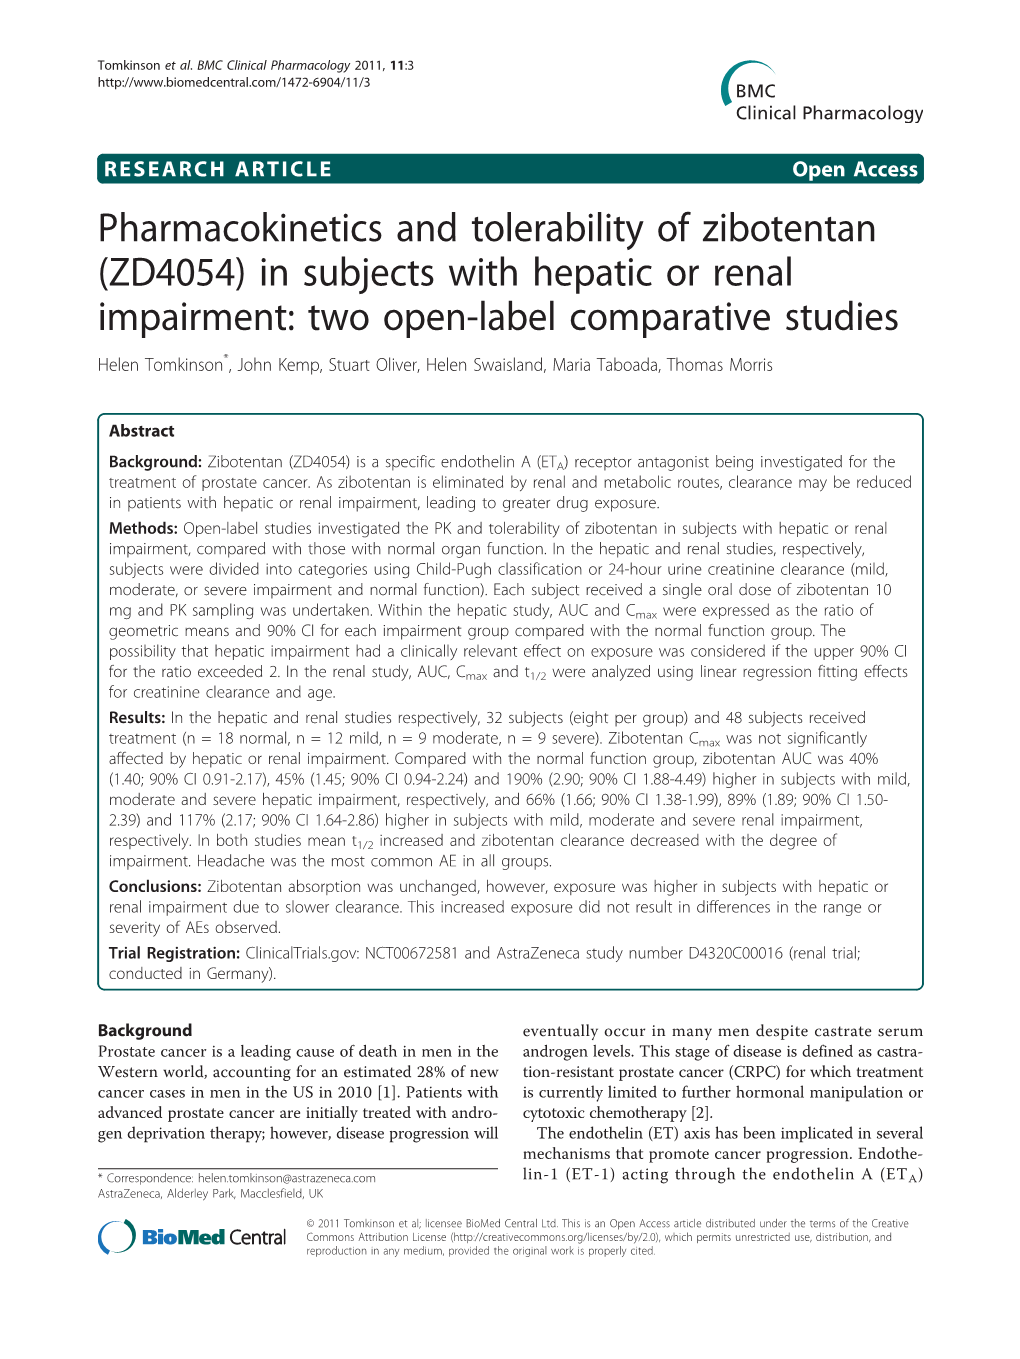 Pharmacokinetics and Tolerability of Zibotentan (ZD4054) in Subjects with Hepatic Or Renal Impairment: Two Open-Label Comparativ